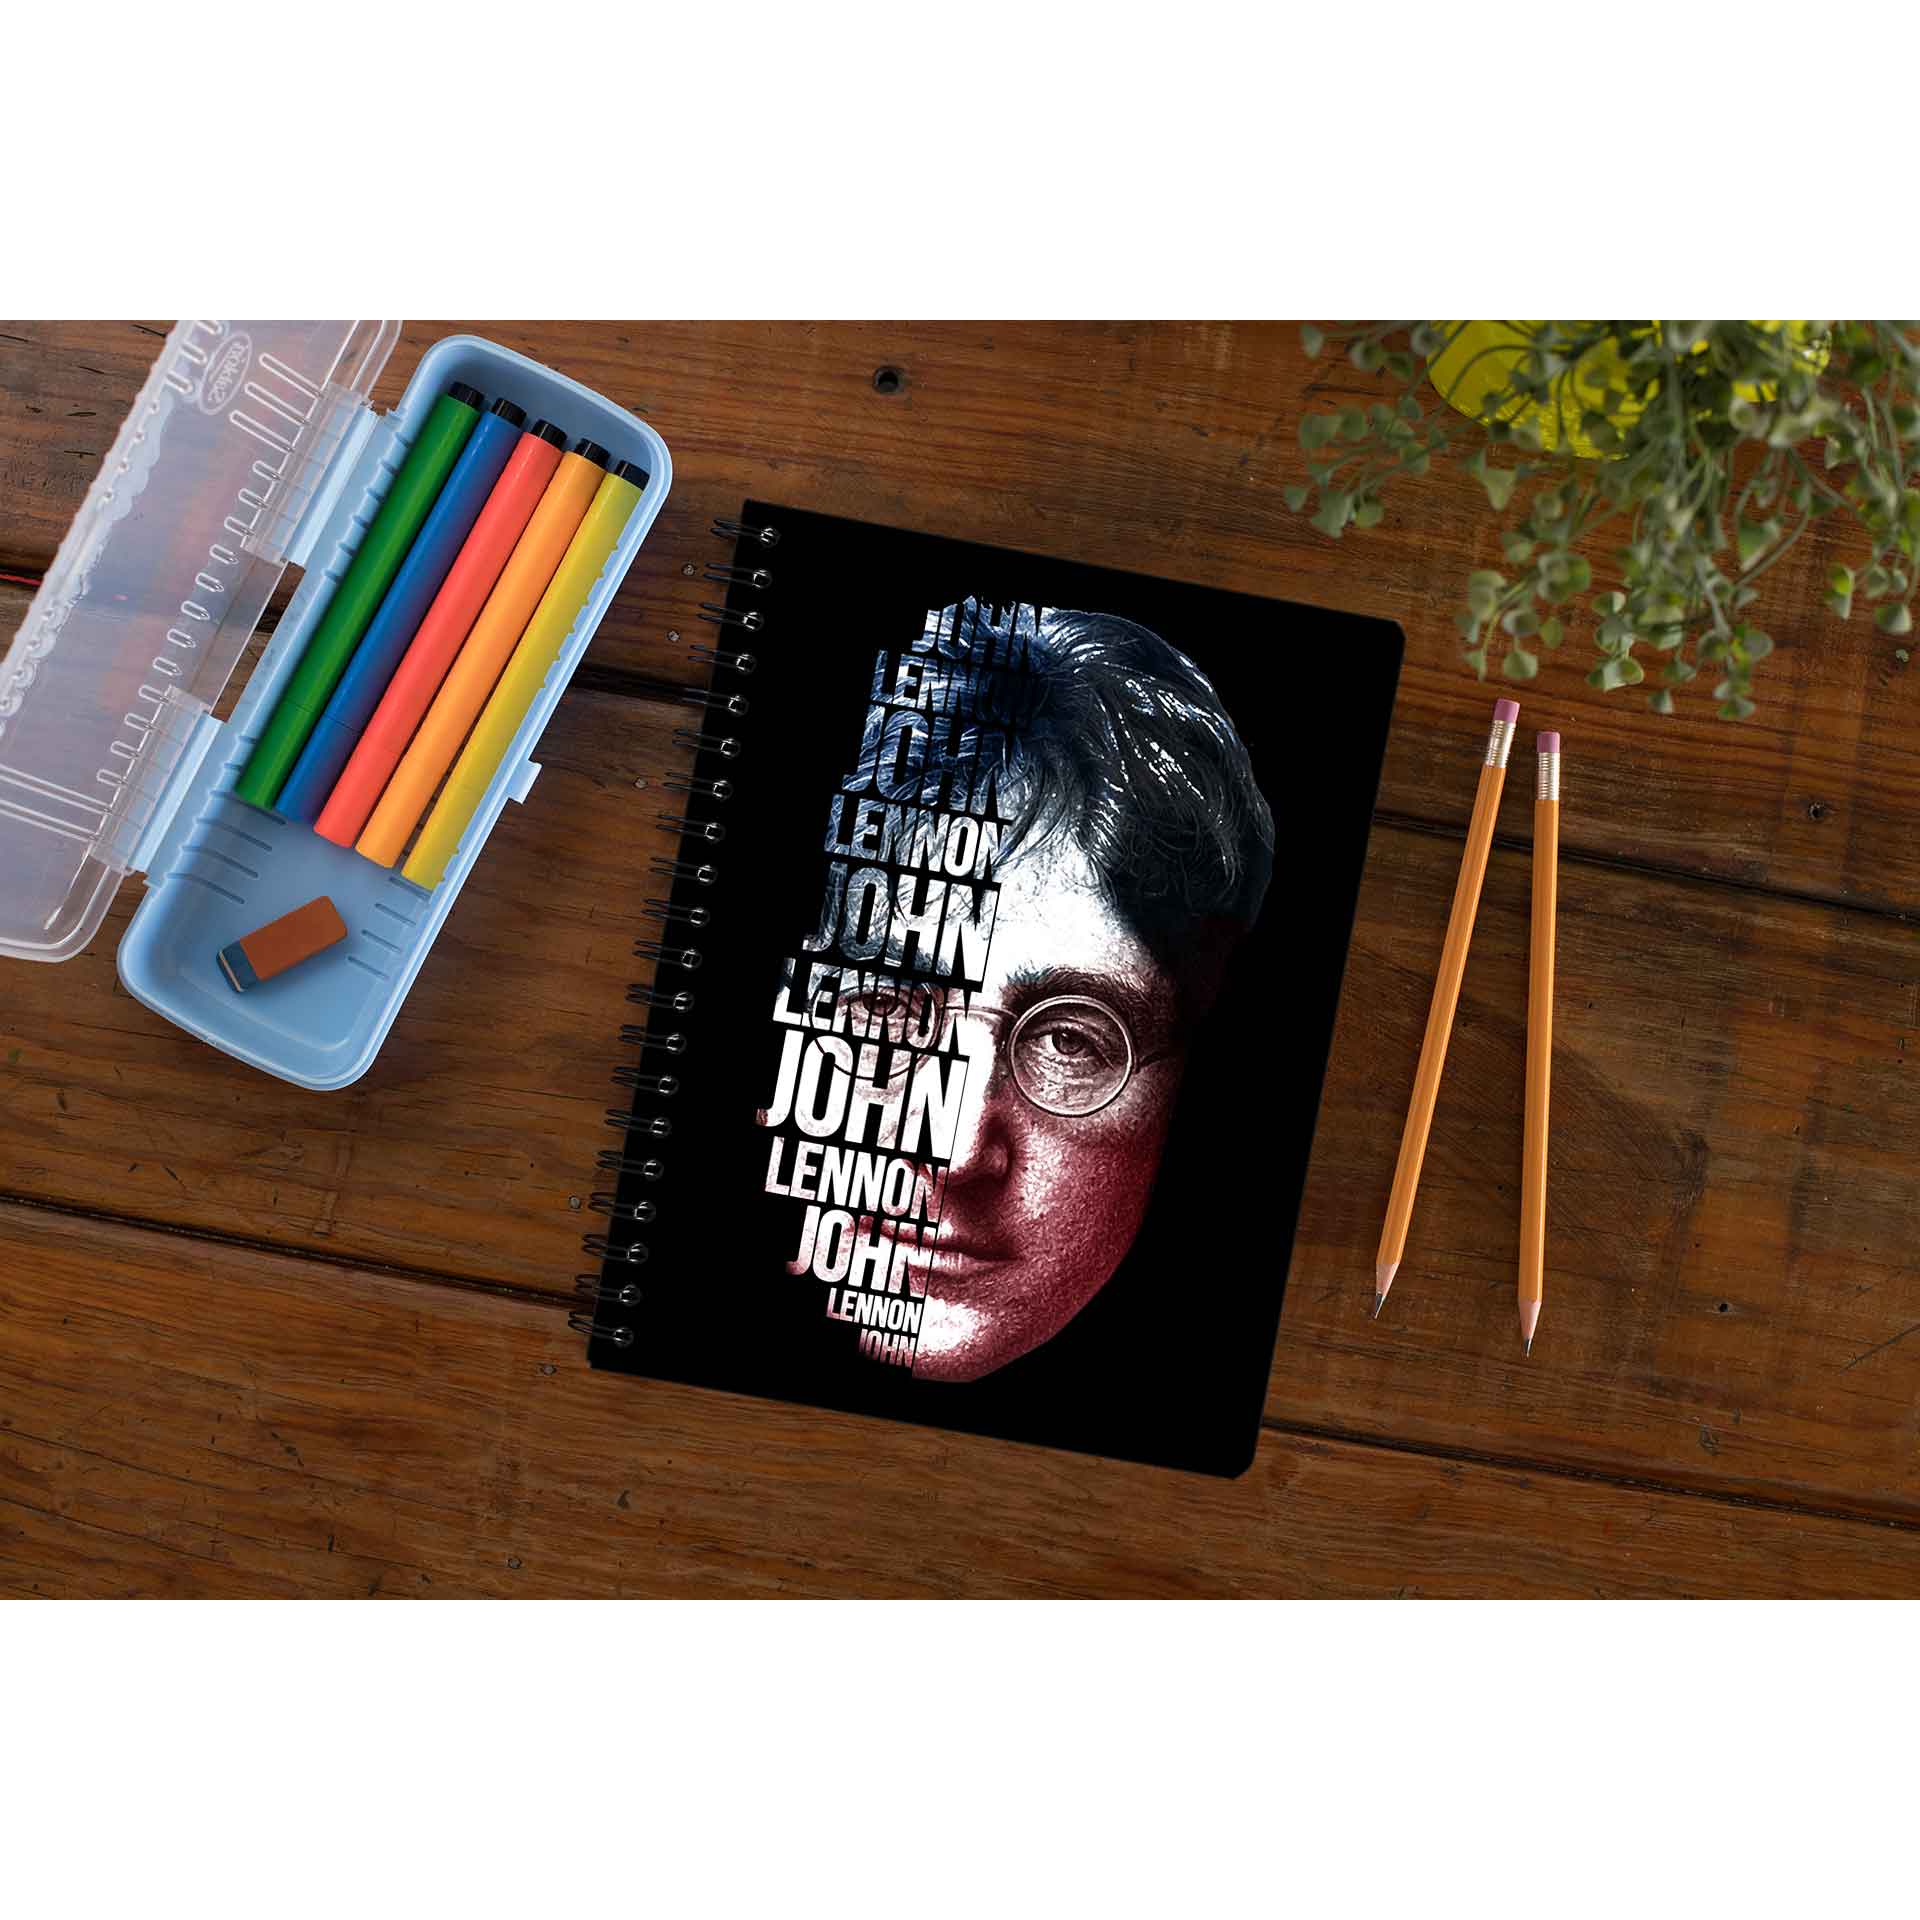 The Beatles Notebook - John Lennon Notebook The Banyan Tee TBT Notepad paper online diary personal girls cute office under 100